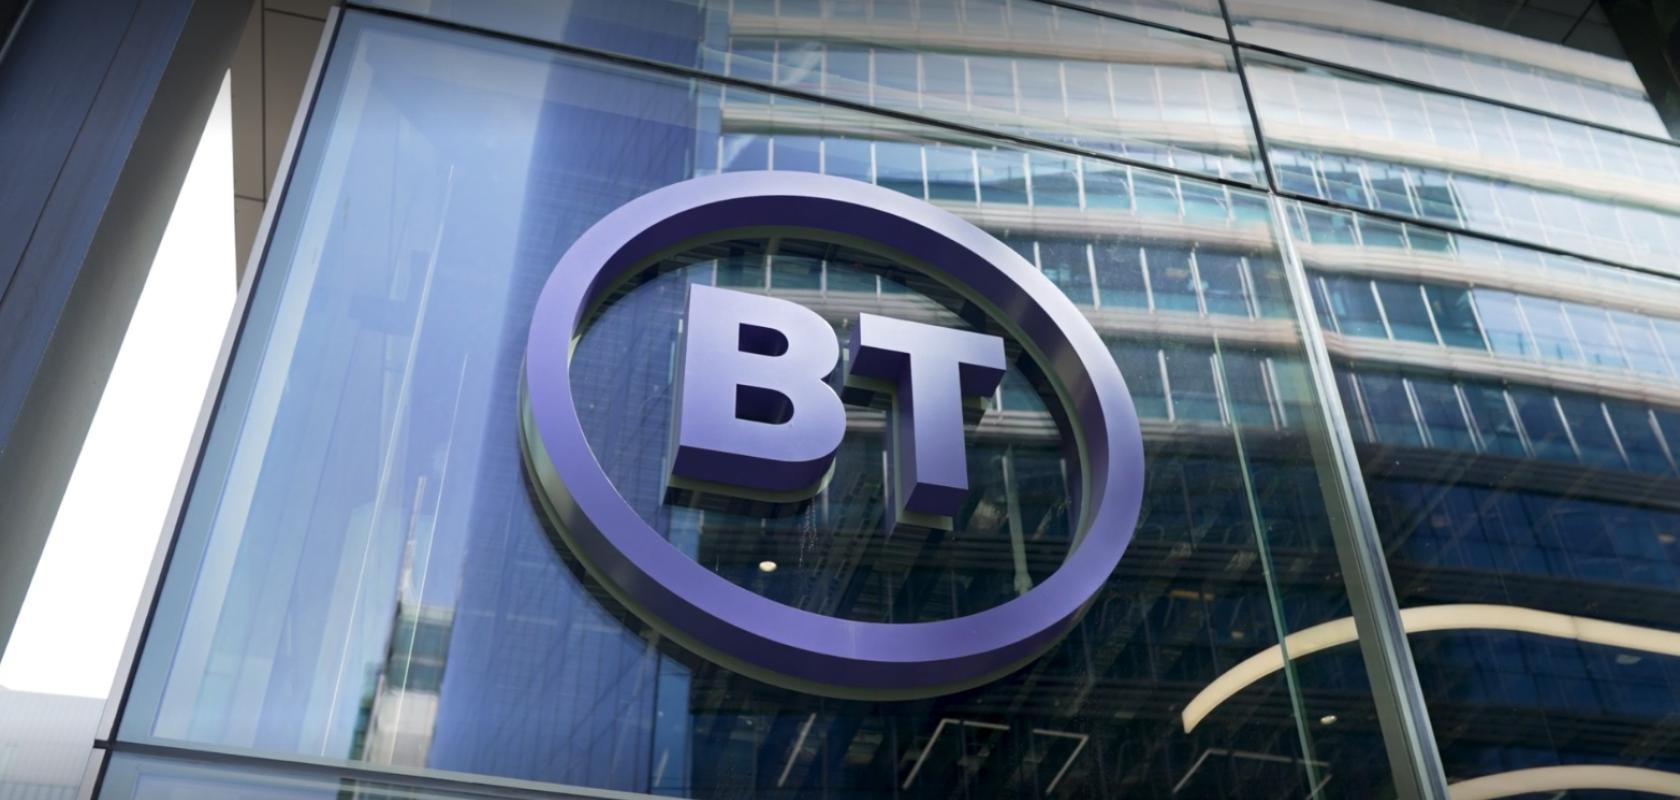 TBC and BT have entered a strategic alliance 